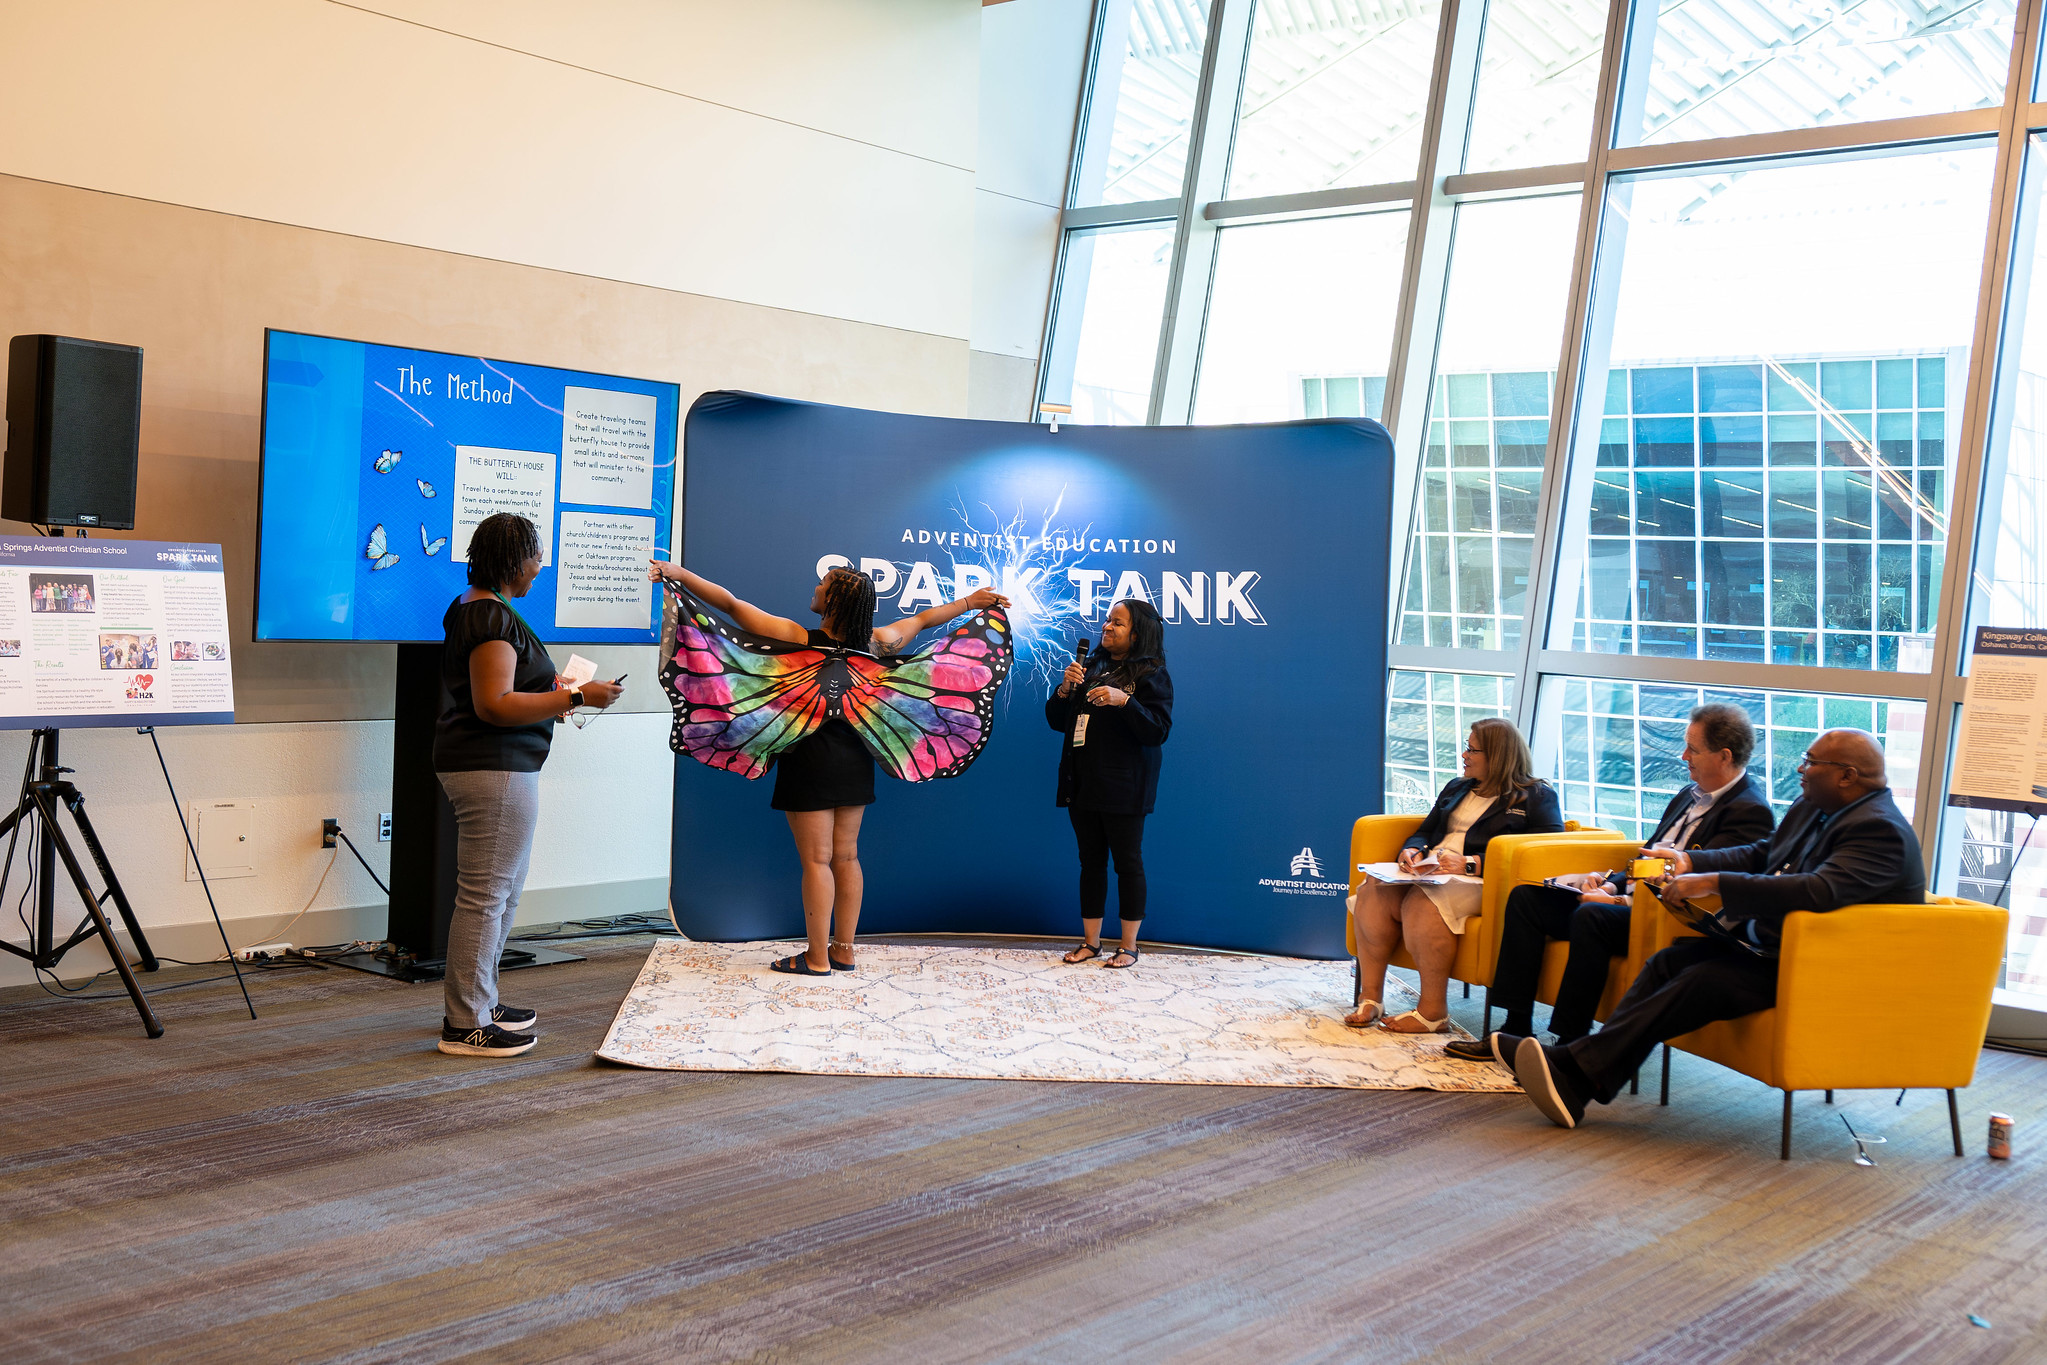 Oakwood Adventist Academy butterfly presentation at educators' convention spark tank event